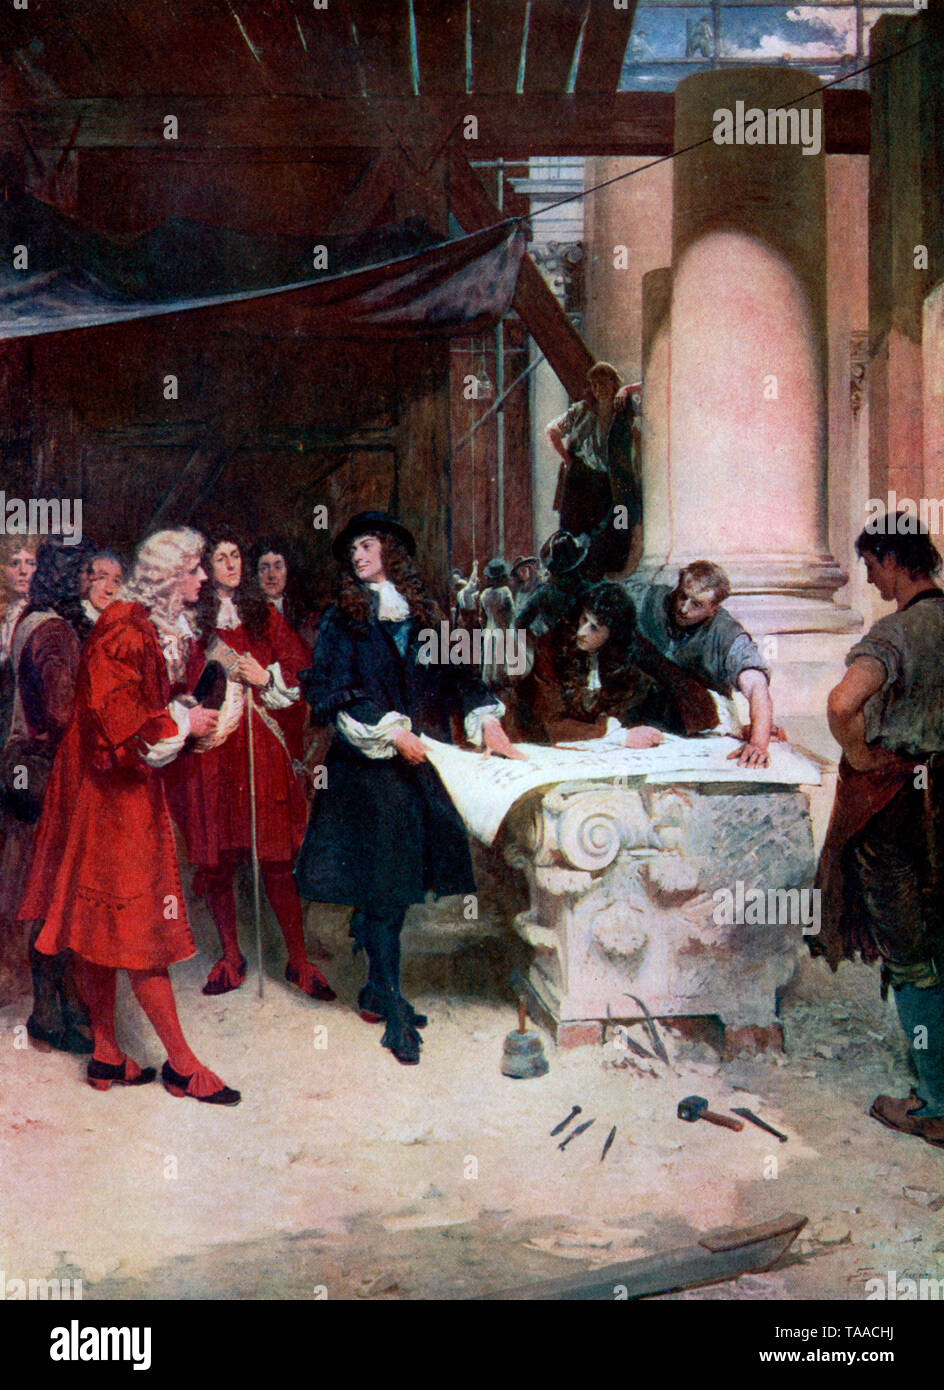 'King Charles's visit to Wren during the Building of St. Paul's'. By John Seymour Lucas (1849-1923). King Charles II (1630-1685) was the personal patron of Sir Christopher Wren (1632-1723). Here we see Charles II visiting Sir Christopher during the construction of the present cathedral which dates from the late 17th century and is in the English Baroque style. The cathedral was completed within Wren's lifetime and was part of a major rebuilding program which took place after the Great Fire of London. Stock Photo